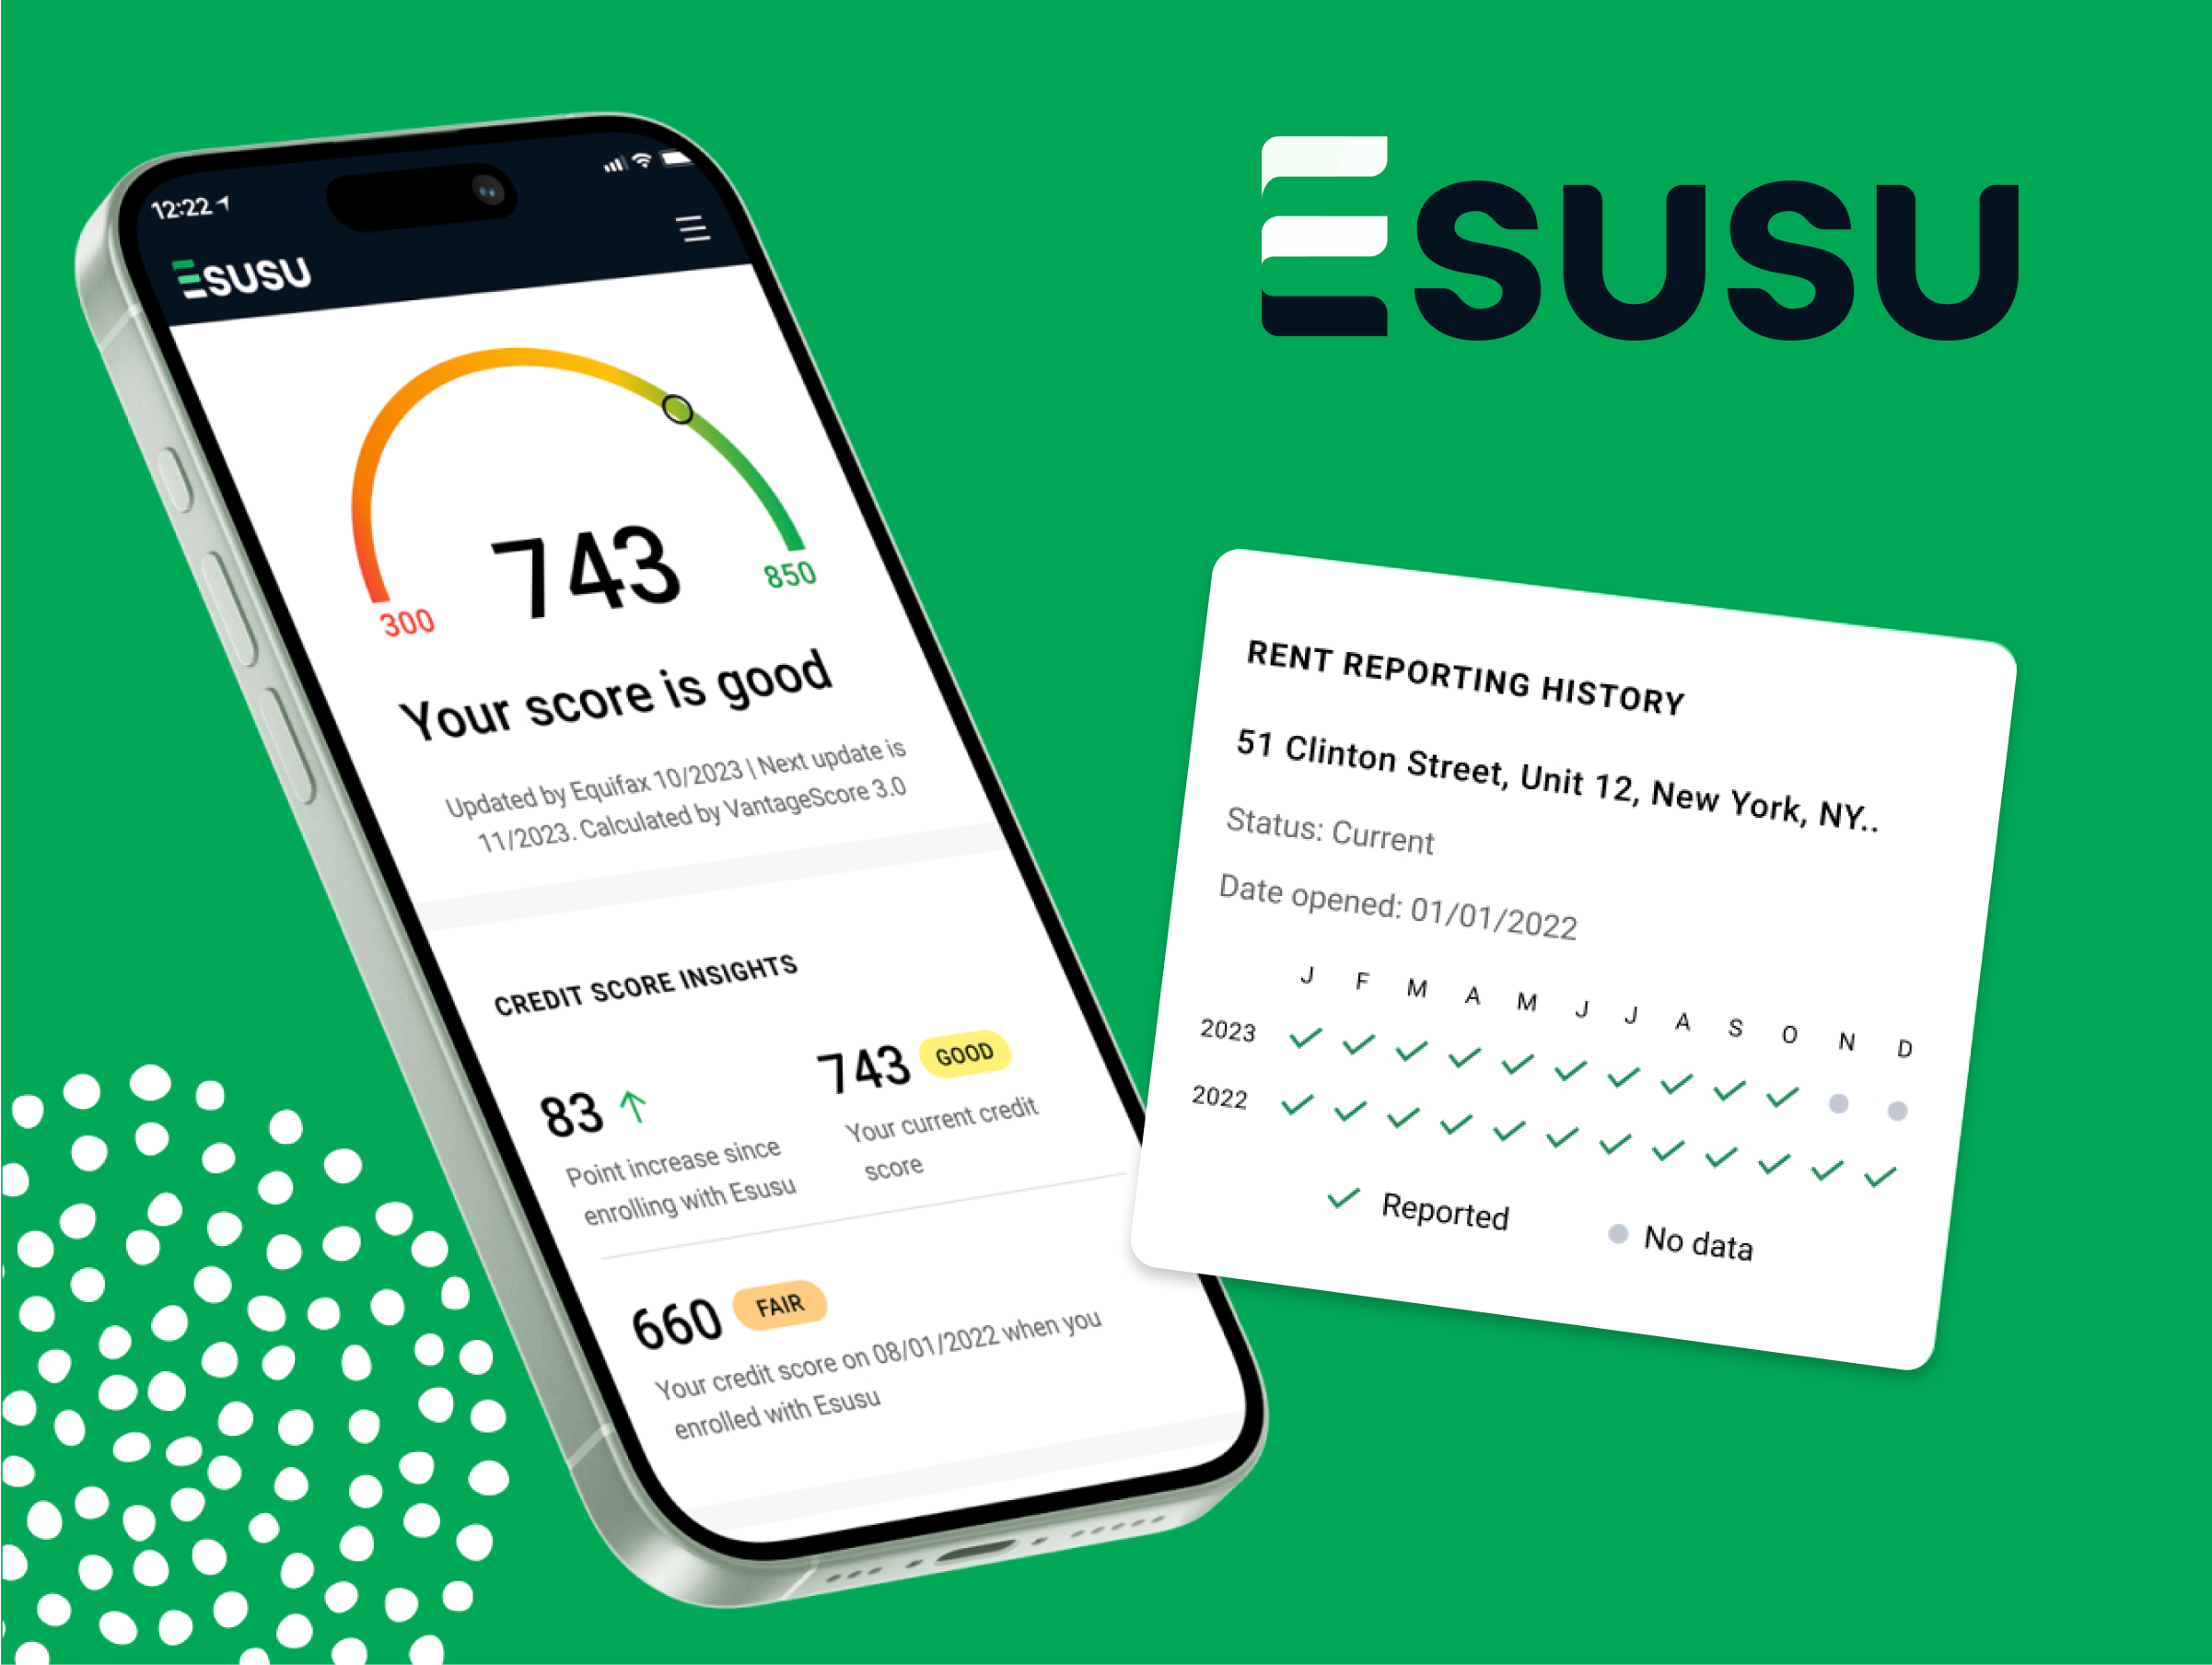 Esusu advertisement featuring a smartphone displaying a credit score of 743 with the message 'Your score is good.' Below the score, details of credit score insights are shown, including the number of on-time payments, total credit usage, and recent credit inquiries. Next to the phone, a rent reporting history chart is displayed for 51 Clinton Street, Unit 12, New York, NY, with reported payments marked for each month. The Esusu logo is visible at the top right of the image on a green background.